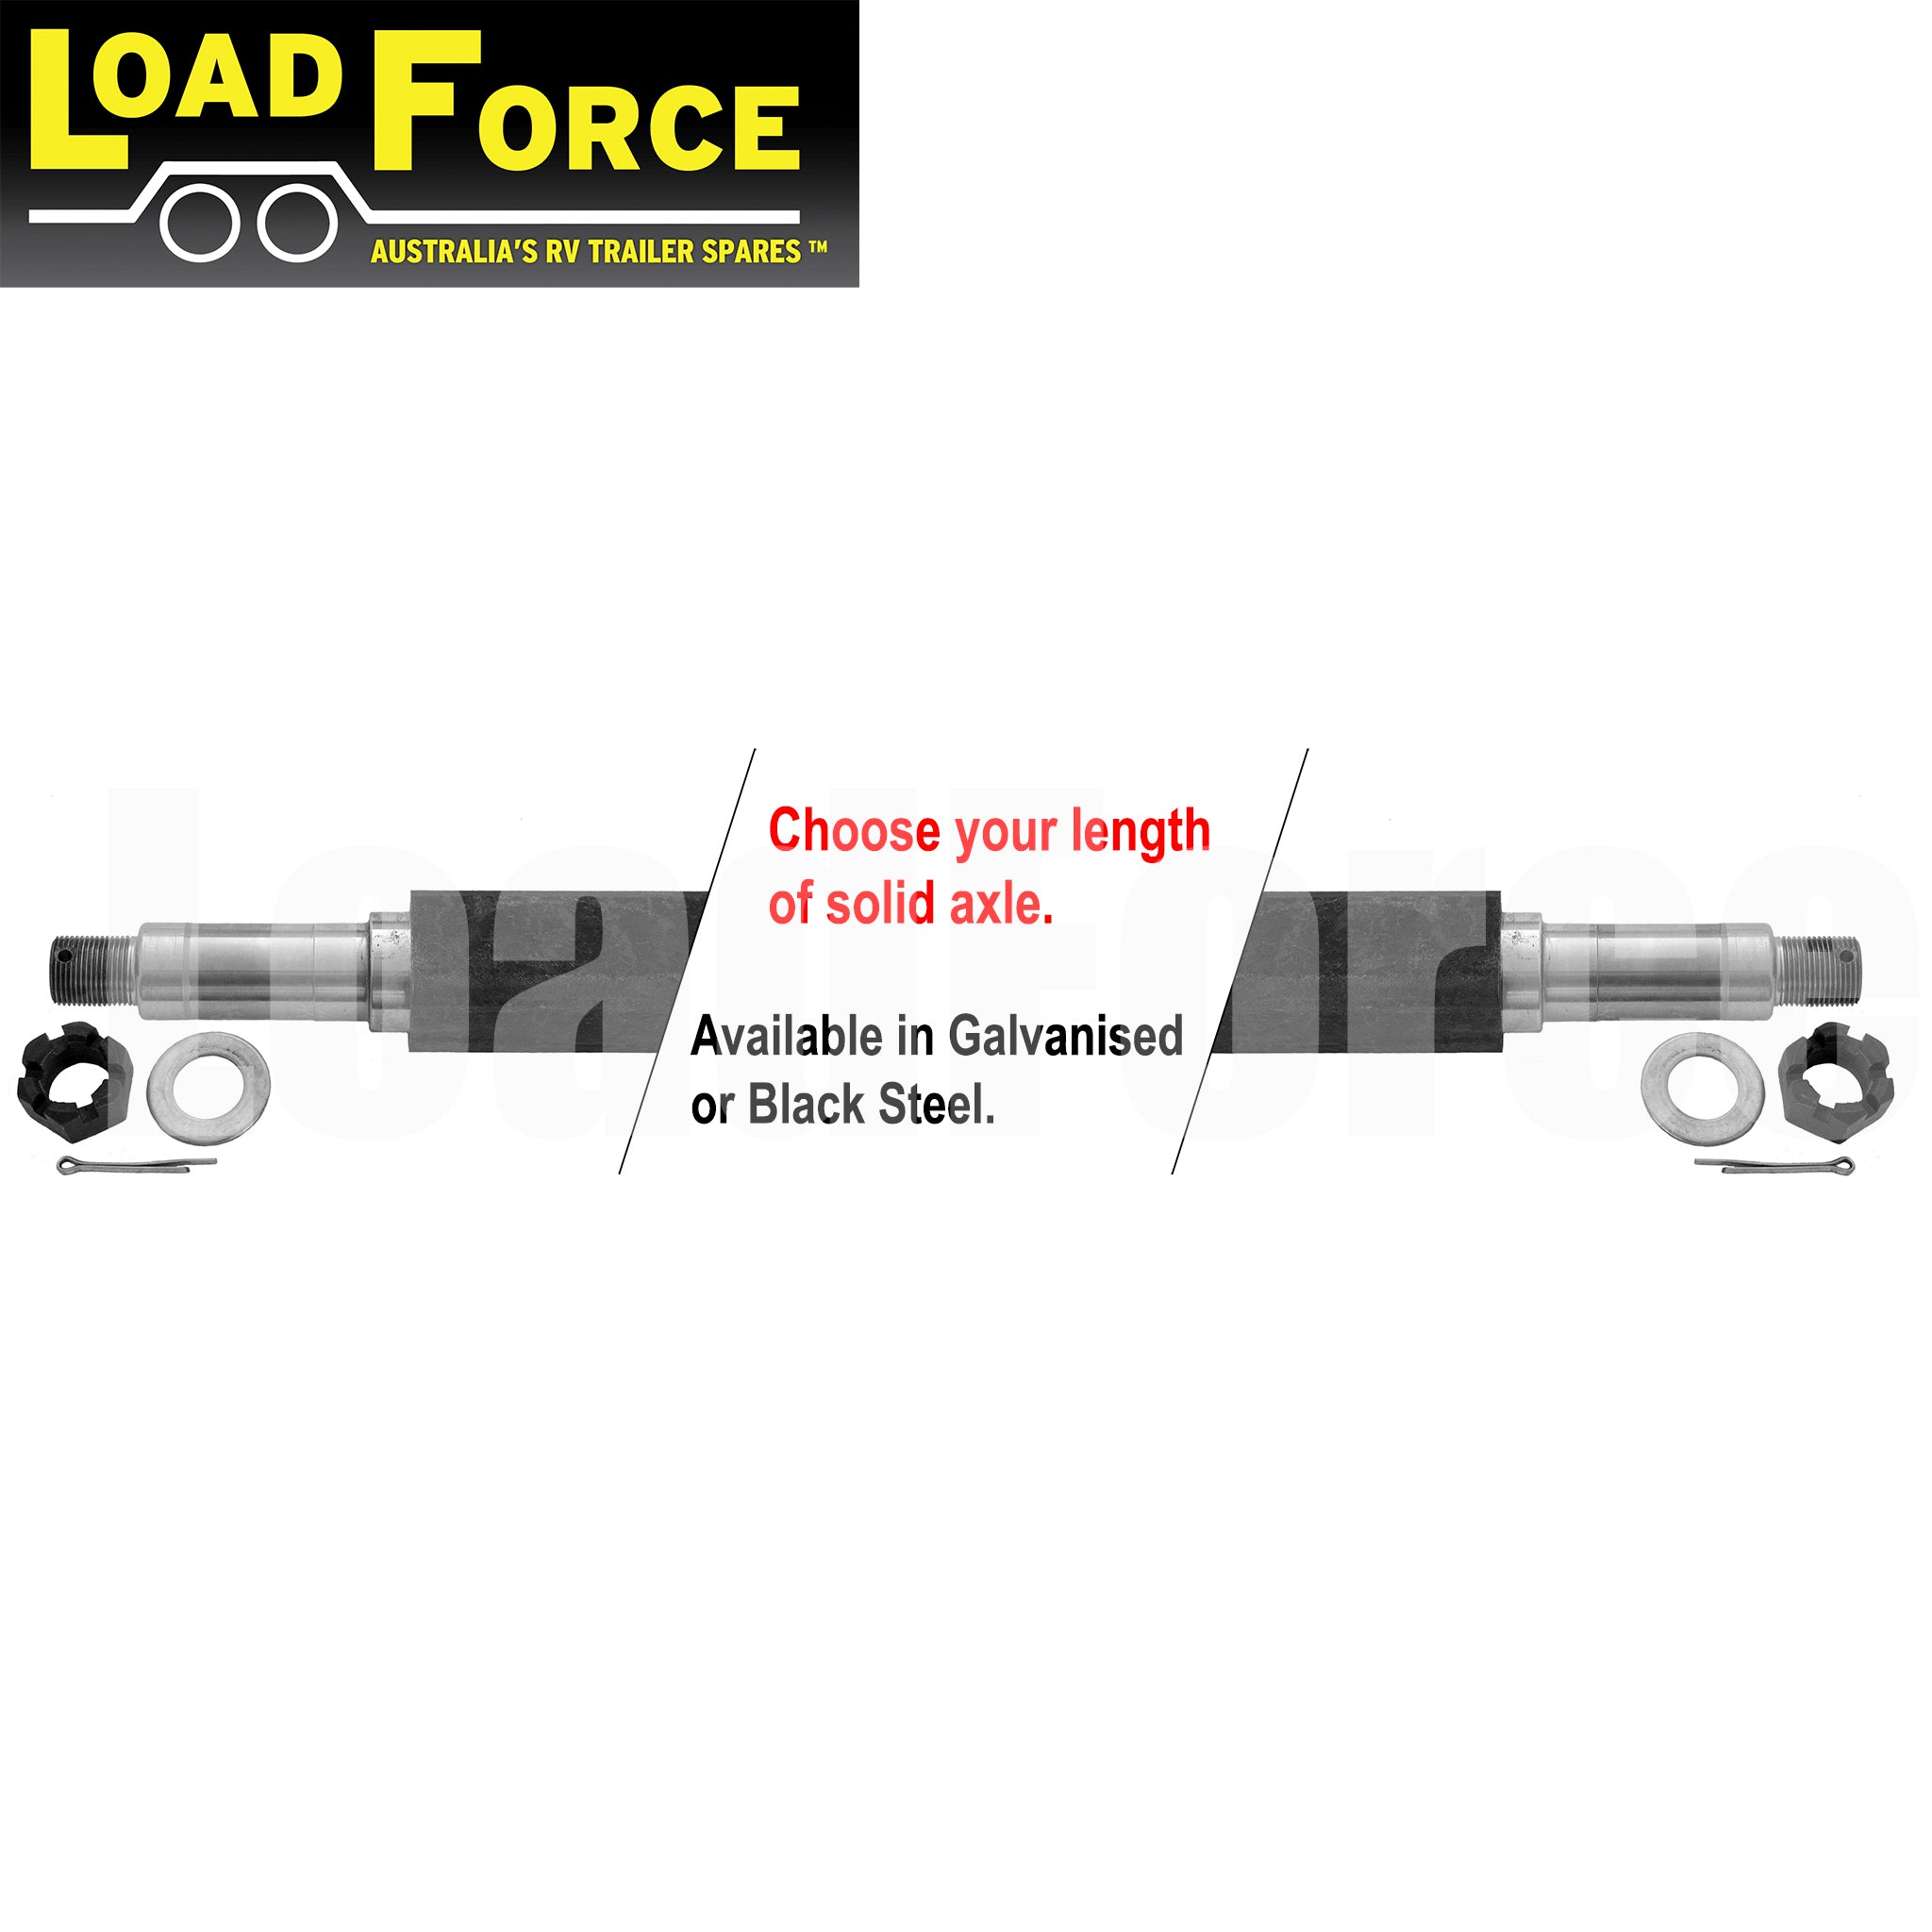 LoadForce Axle 45mm square parallel bearing turn 1800kg rating - choose length and finish